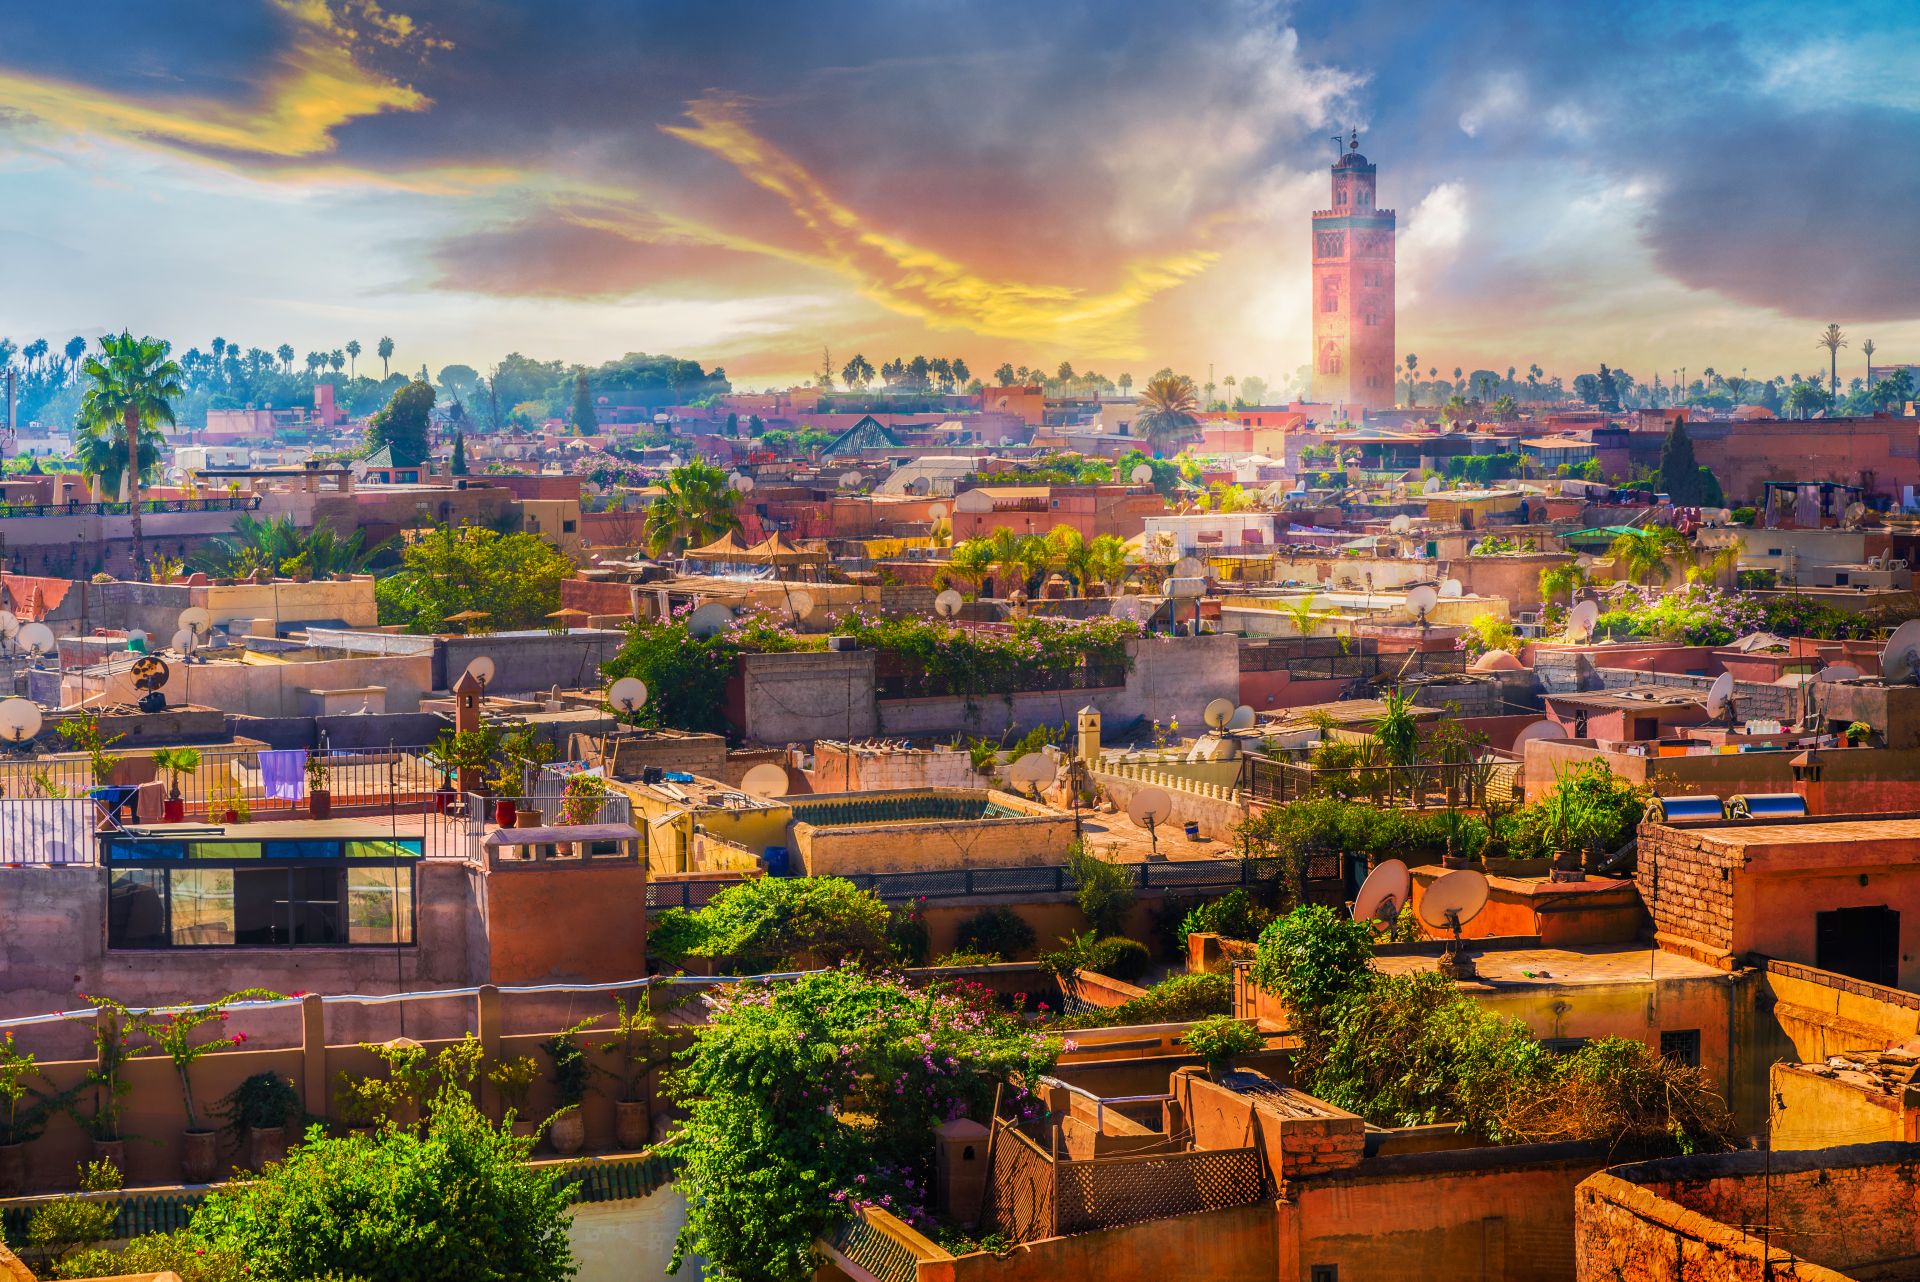 Panoramic views of the medina in Marrakech, Morocco